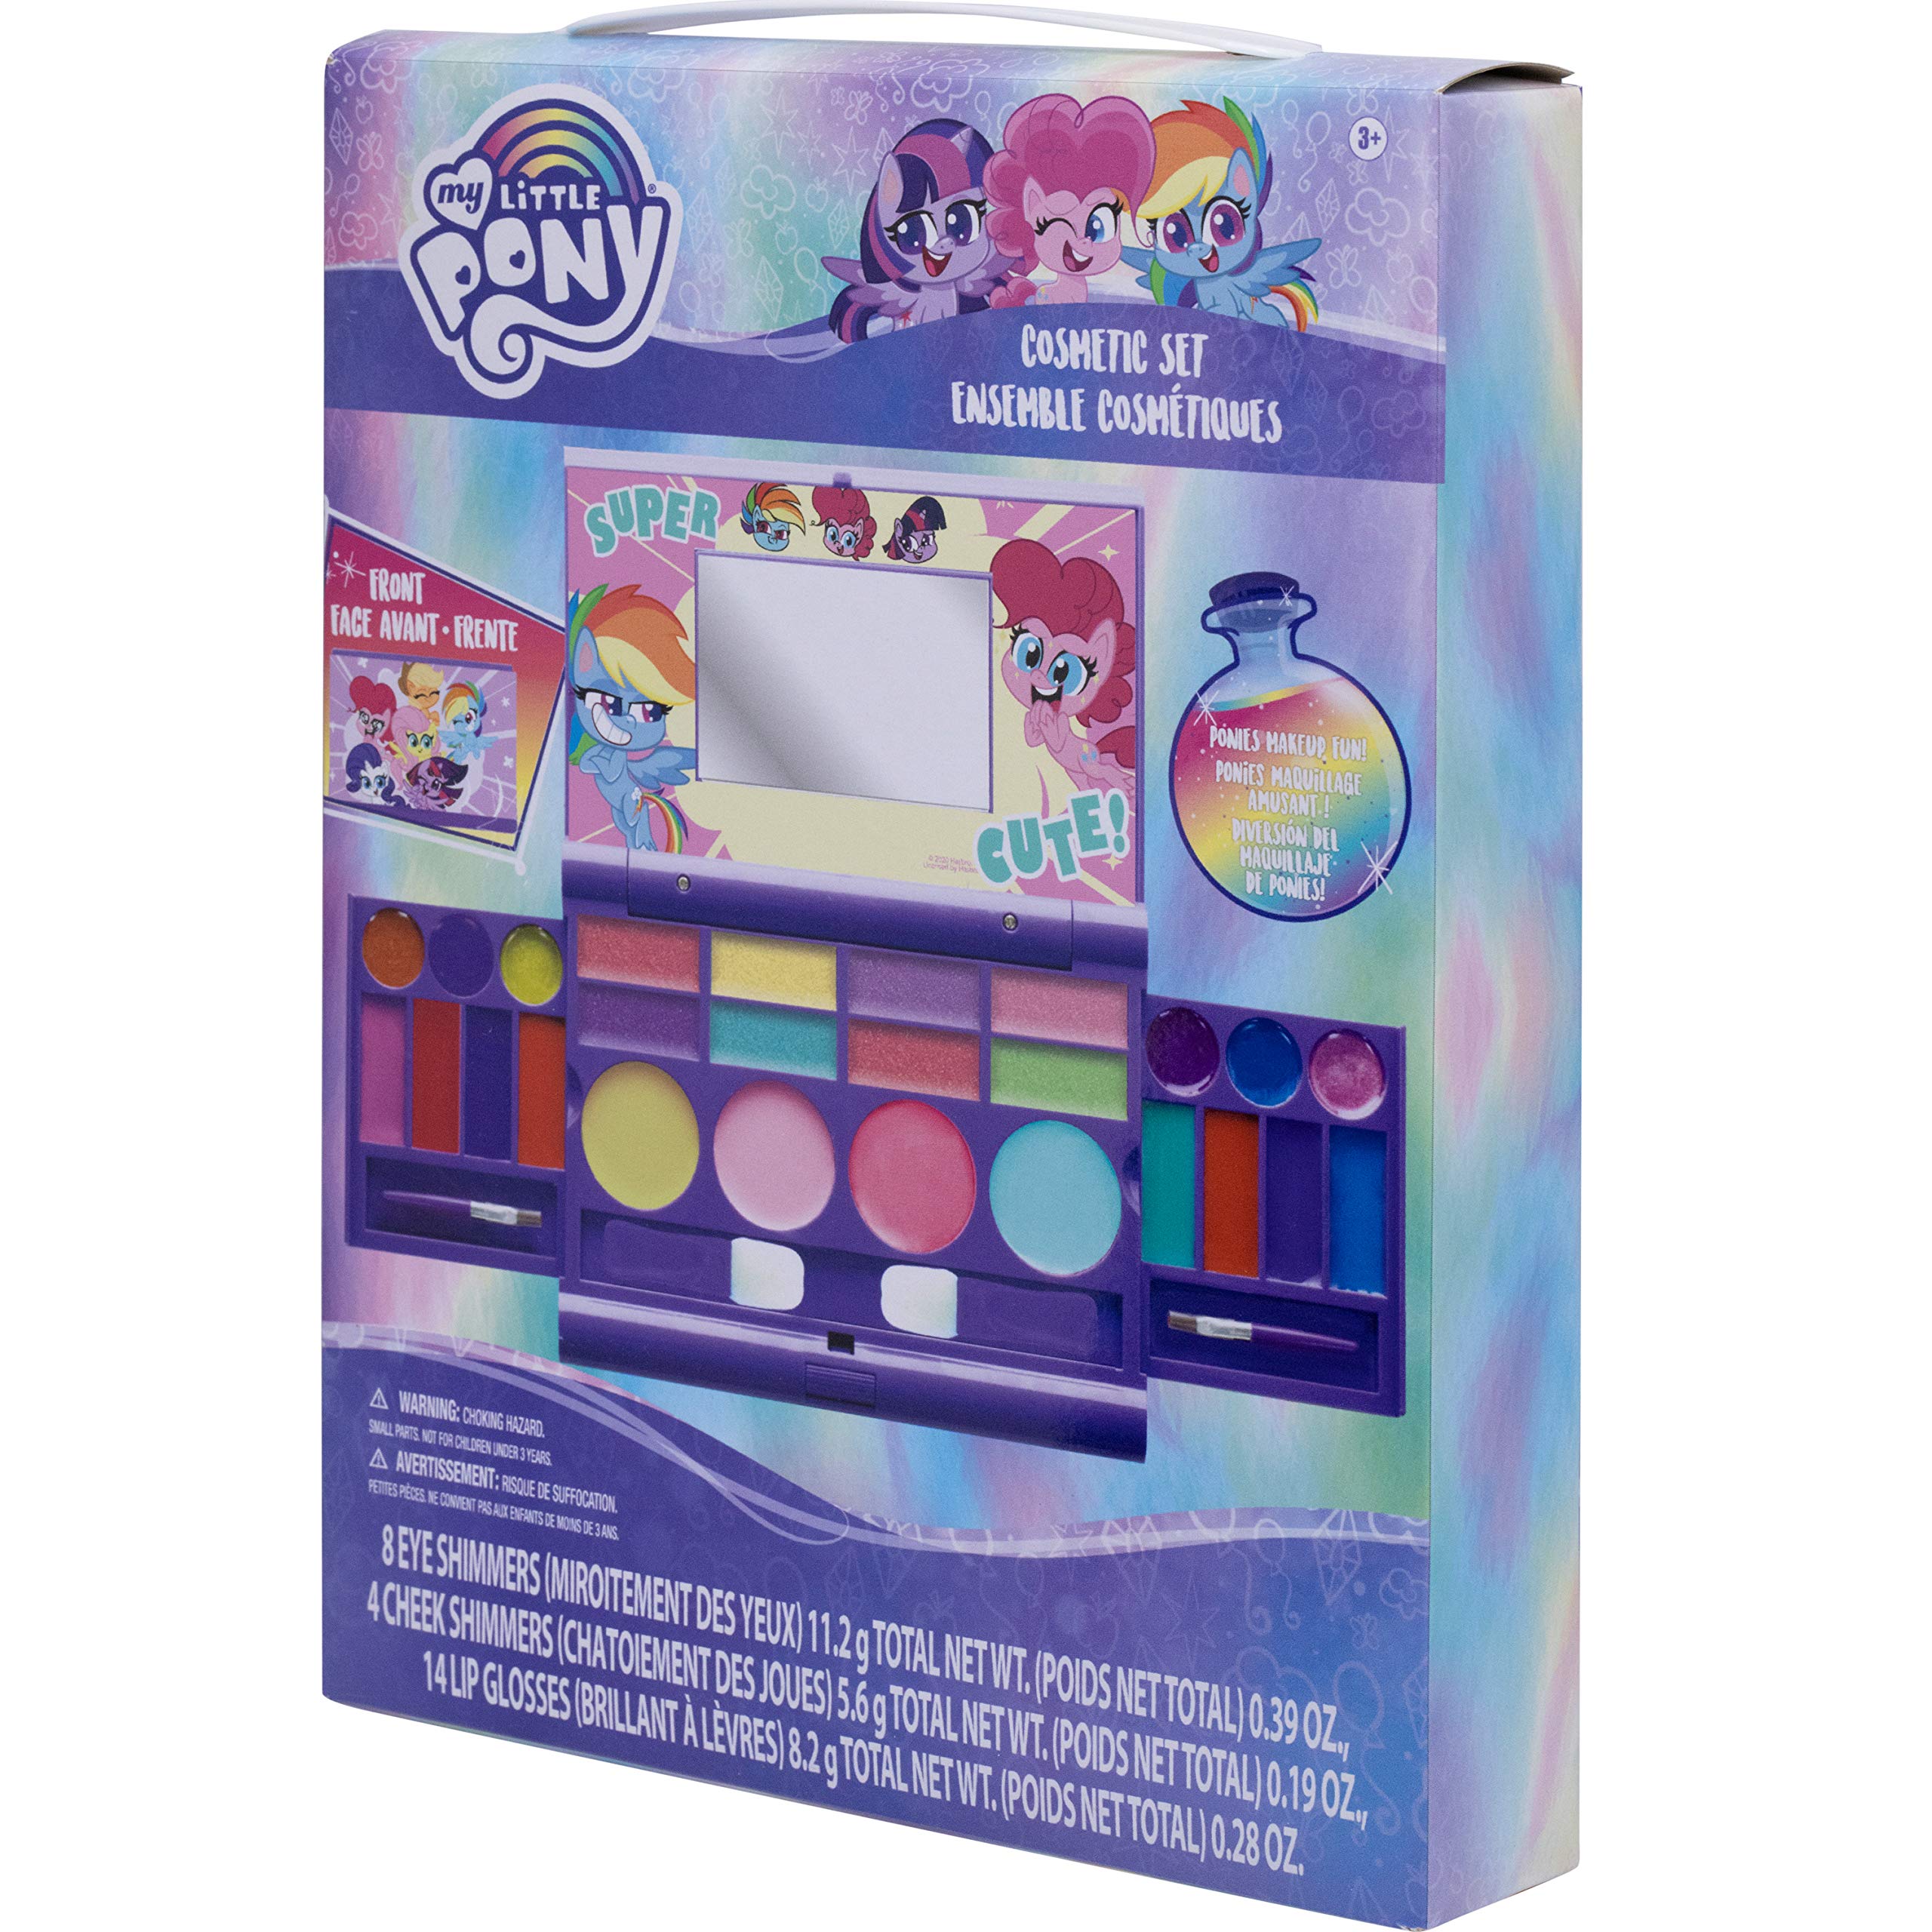 Townley Girl My Little Pony Hasbro Cosmetic Compact Set with Mirror 14 Lip glosses, 4 Cheek Shimmers, 8 Eye Shimmer Portable Foldable Washable Make Up Beauty Kit Box Toy Set for Girls & Kids